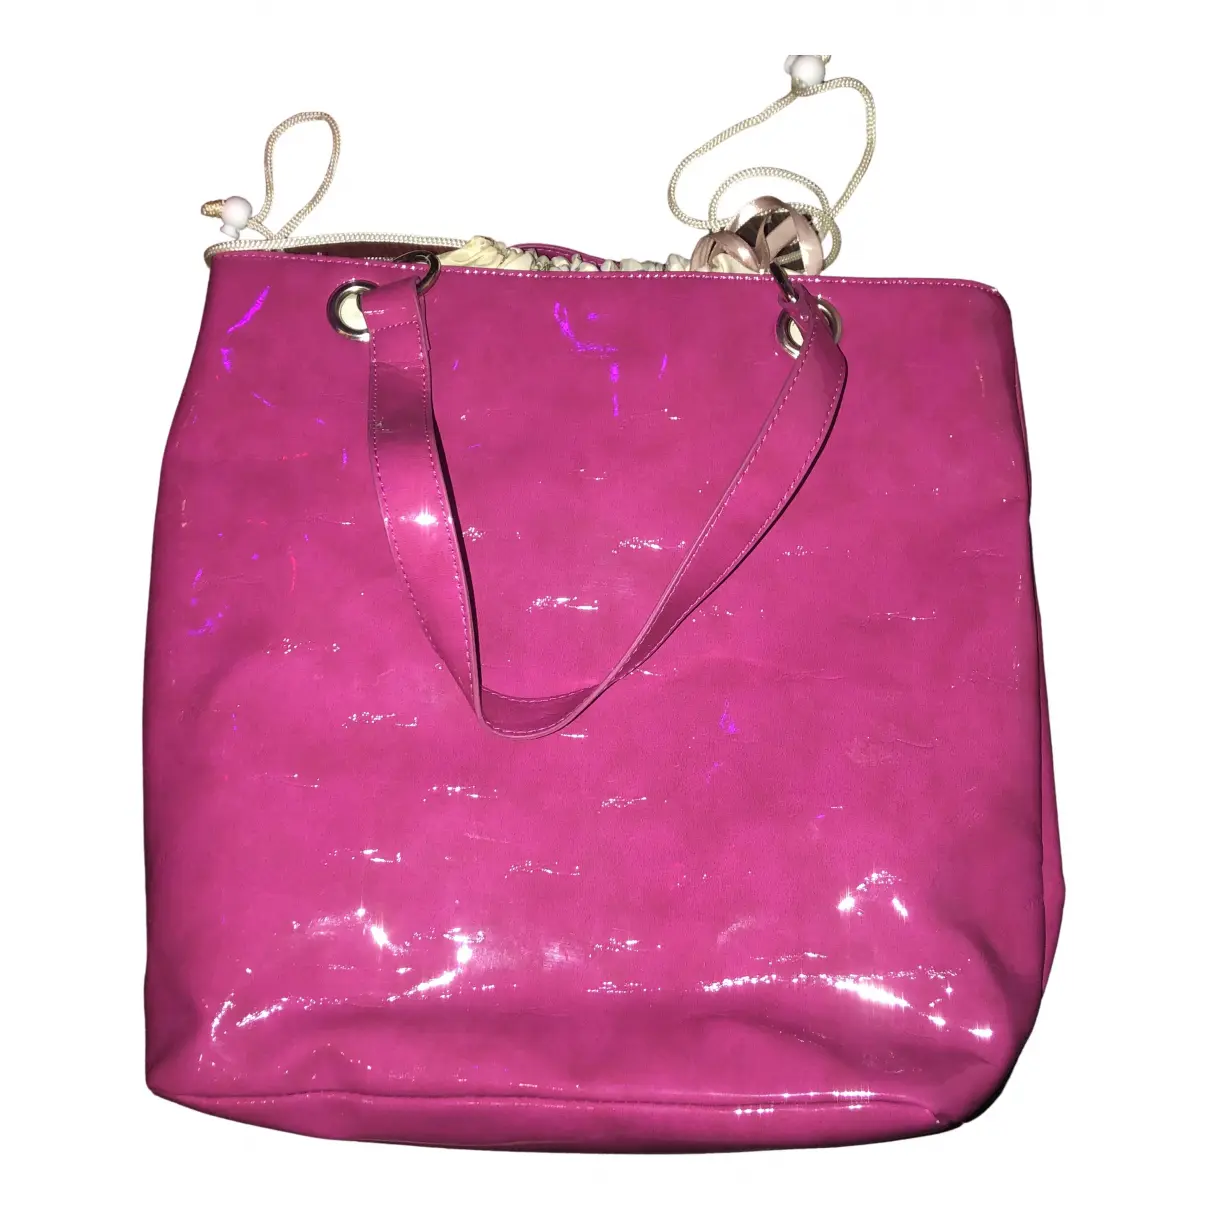 Patent leather tote Gottex